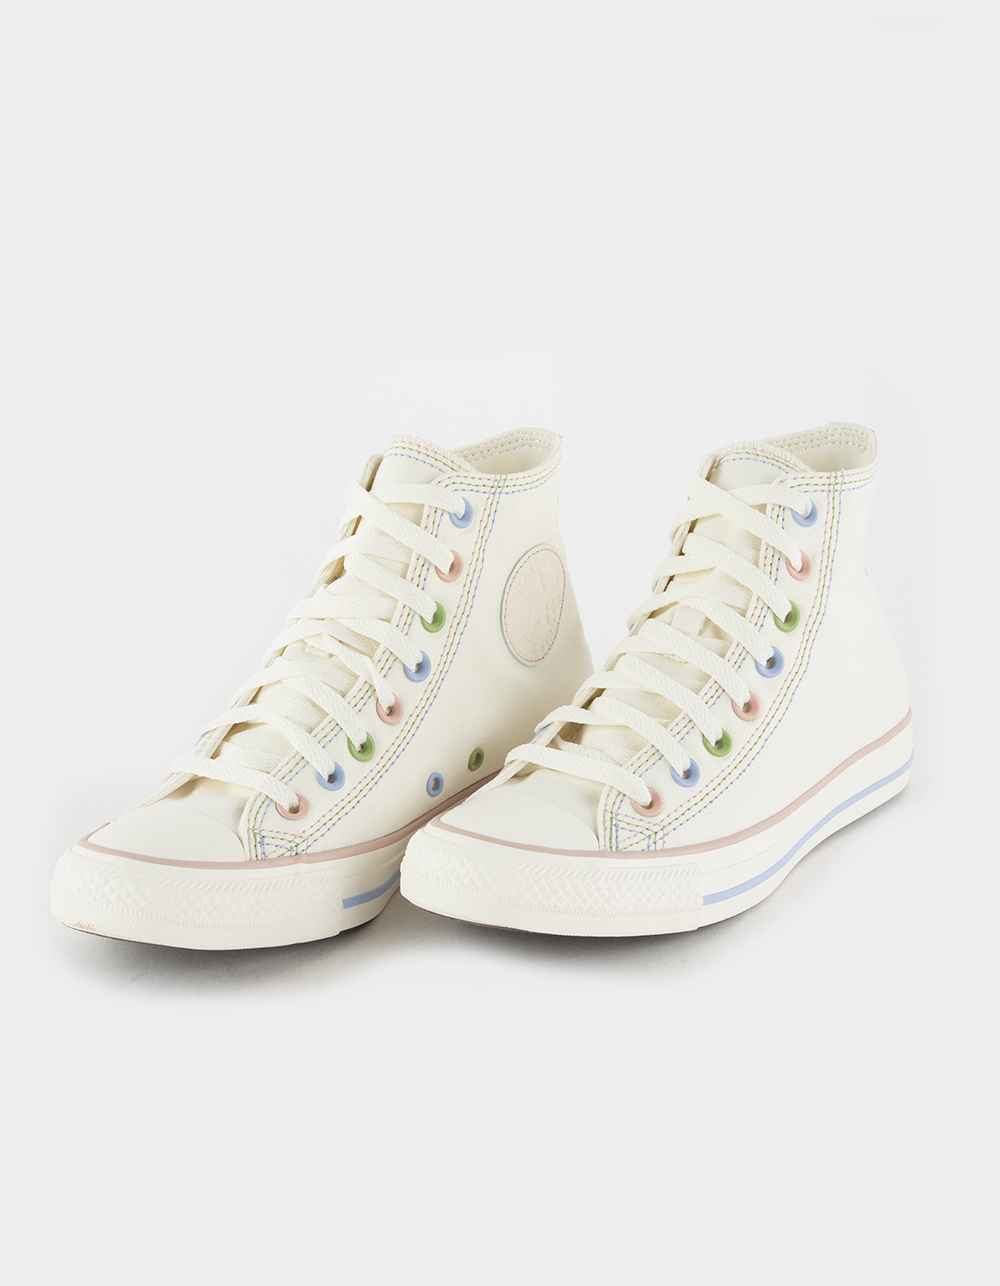 cyklus Flourish Seks CONVERSE Chuck Taylor All Star Vintage Remastered Womens Shoes - WHITE |  Tillys